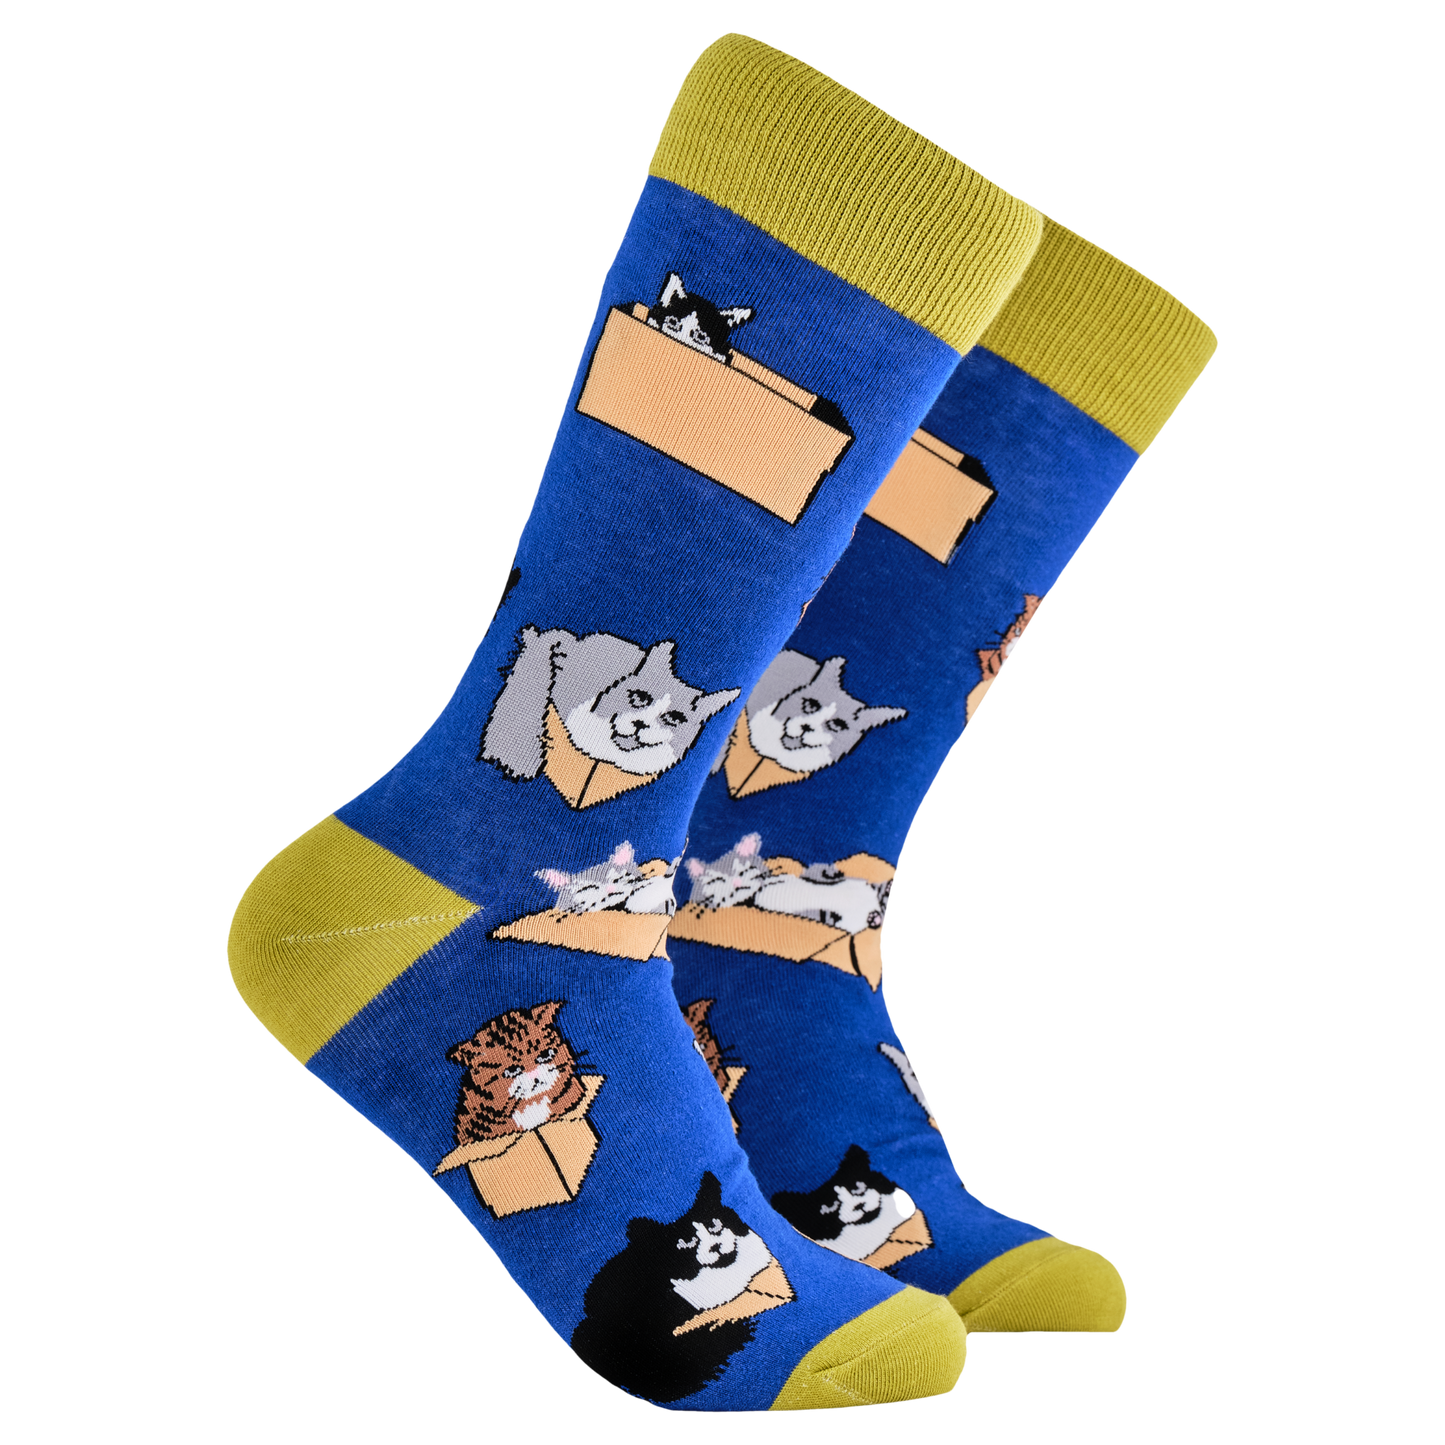 Cat Socks - Purrrfect Fit. A pair of socks depicting cats in boxes. Blue legs, yellow cuff, heel and toe.